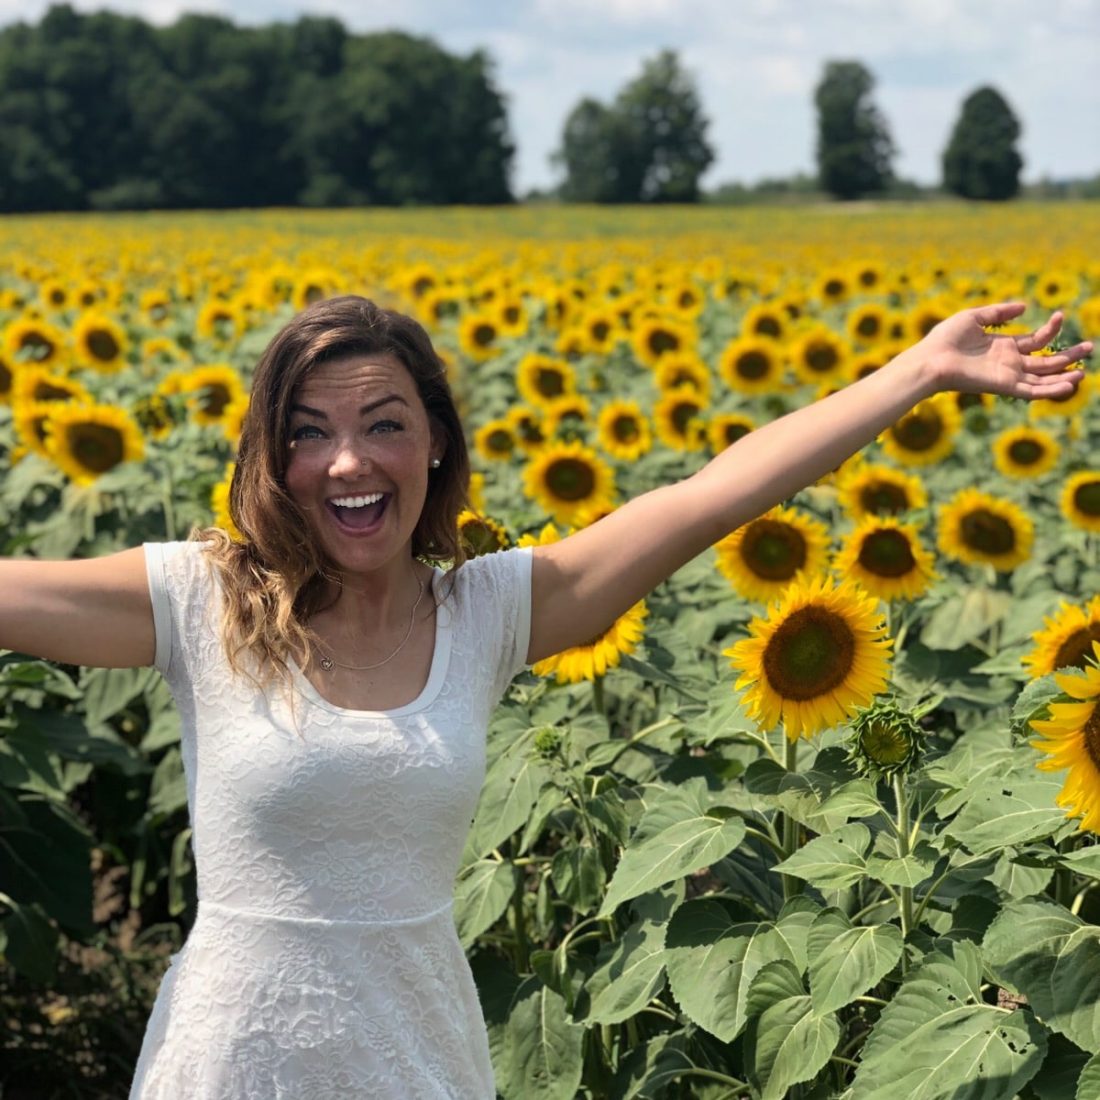 Happy Health and Life Coach, Arielle smiling in a field of sunflowers